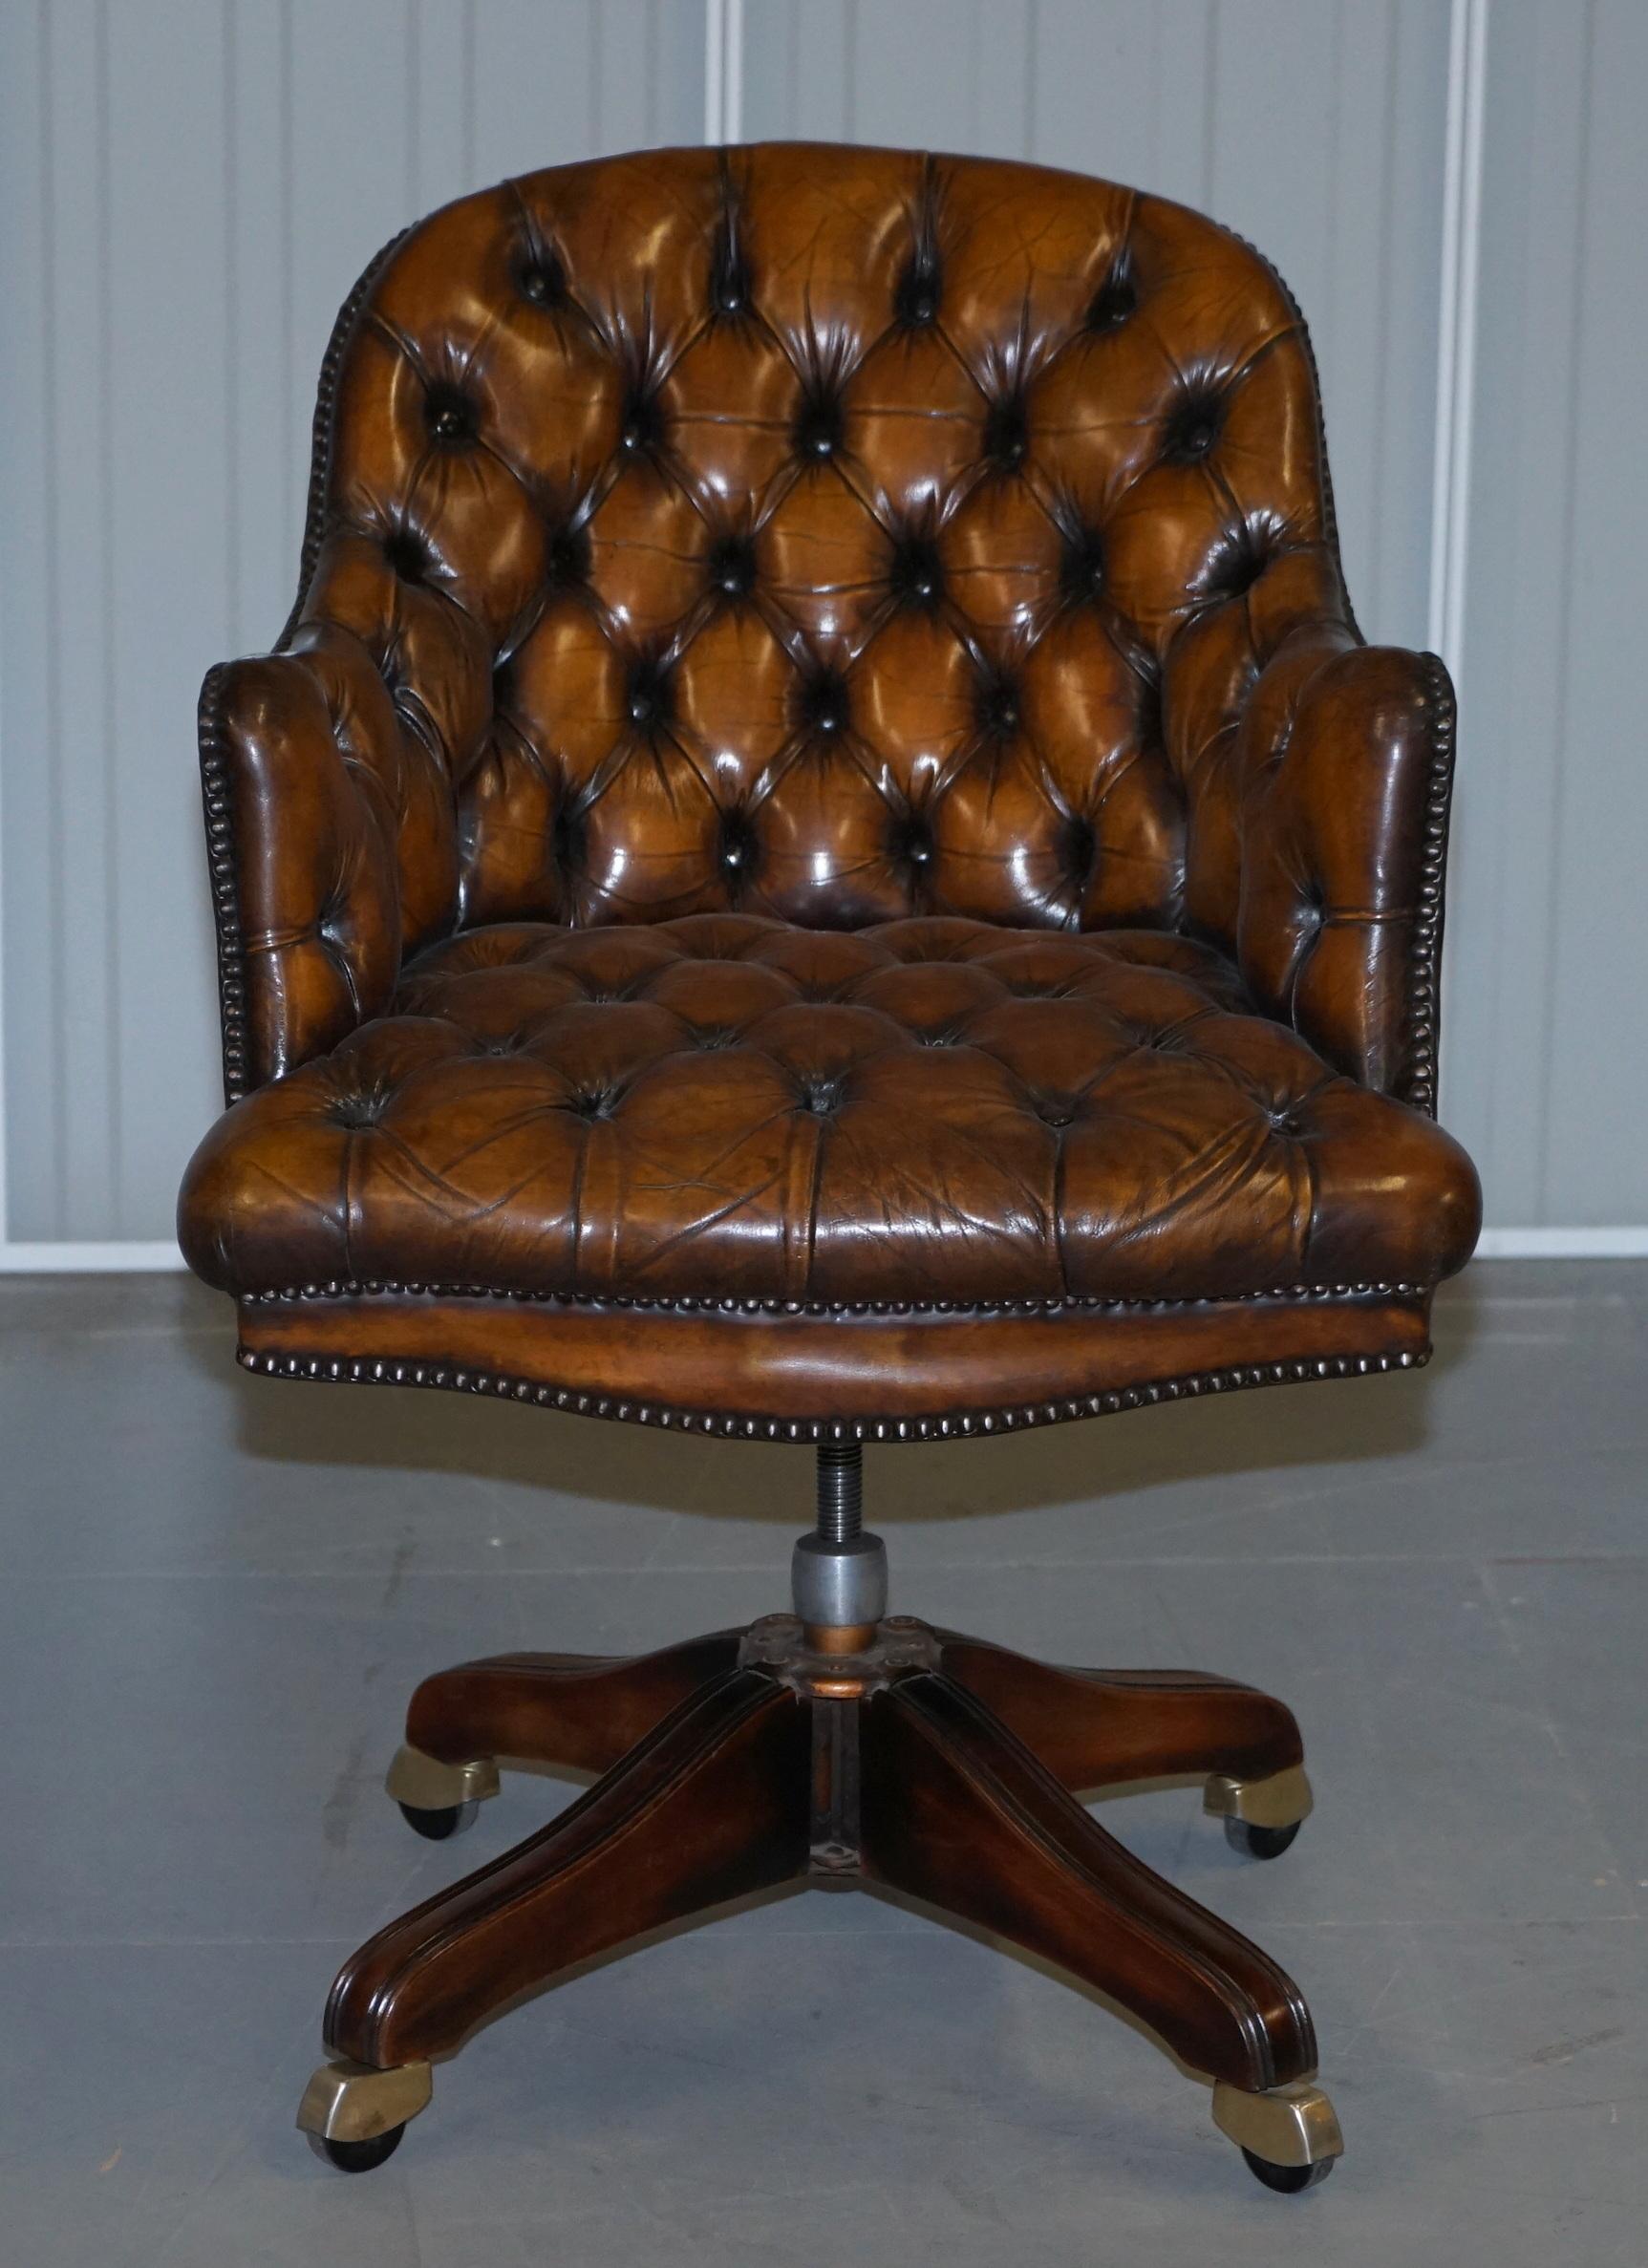 We are delighted to offer for sale this lovely fully restored original vintage hand dyed Mahogany brown leather Chesterfield tufted directors chair

A very good looking well made and comfortable directors chair. Its chesterfield buttoned both back